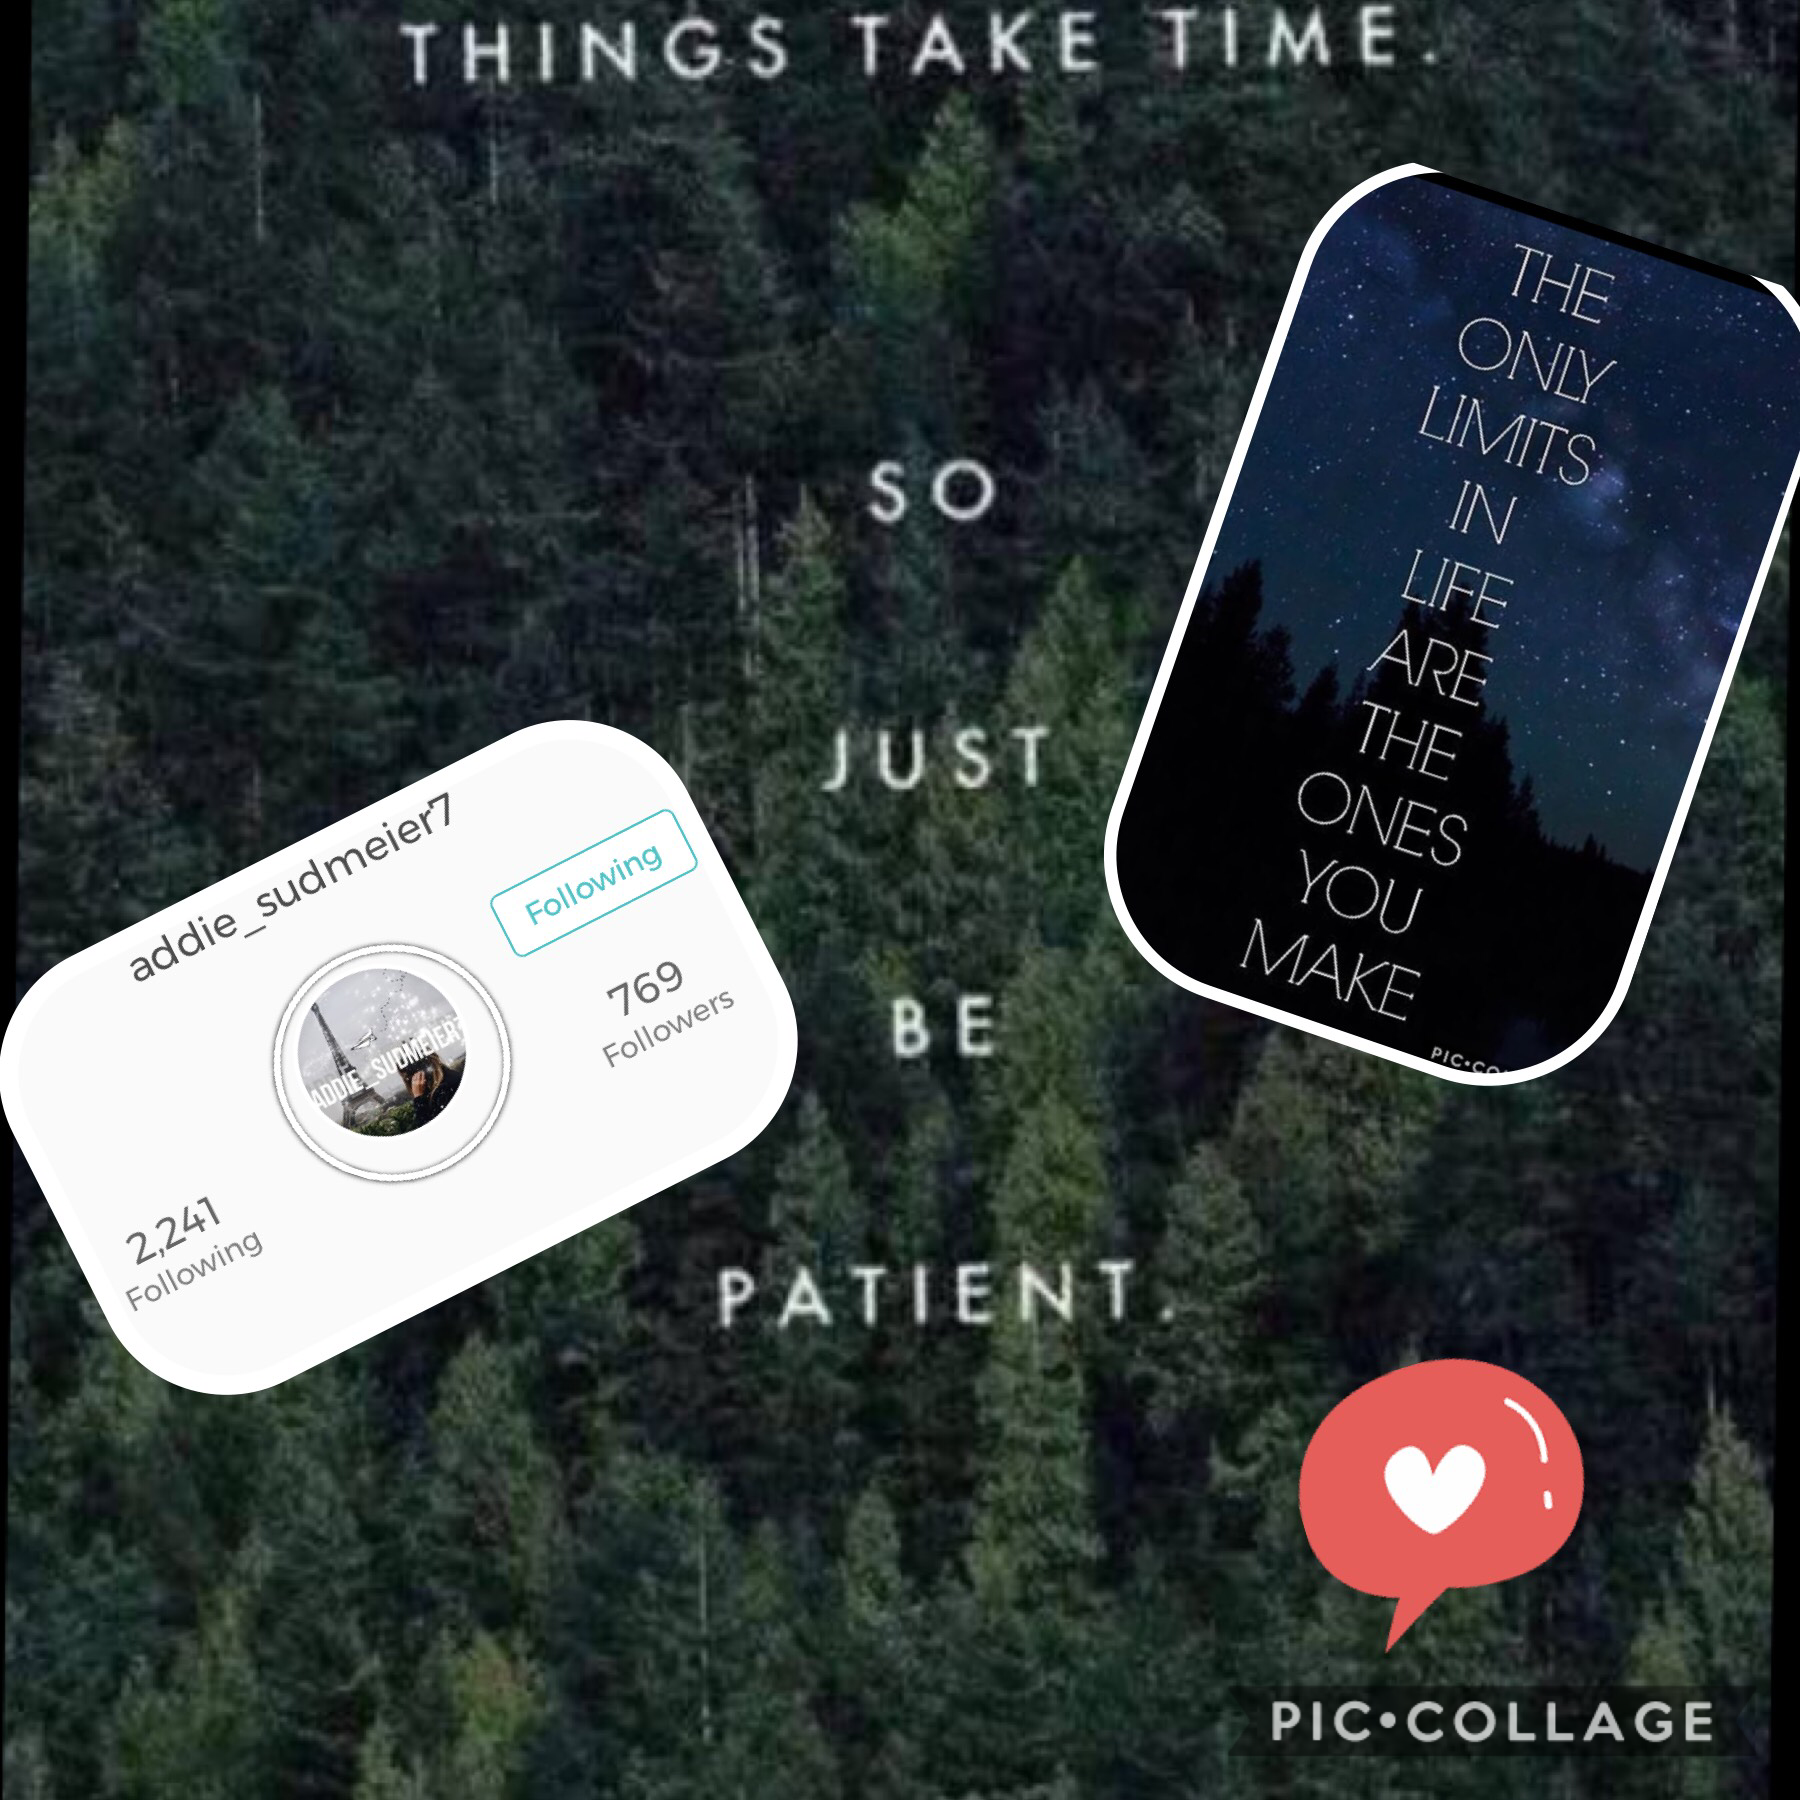 ❣️Tap❣️

I know that you said you were leaving PicCollage but if you see this, I wanted to say that you are really good at collages😁